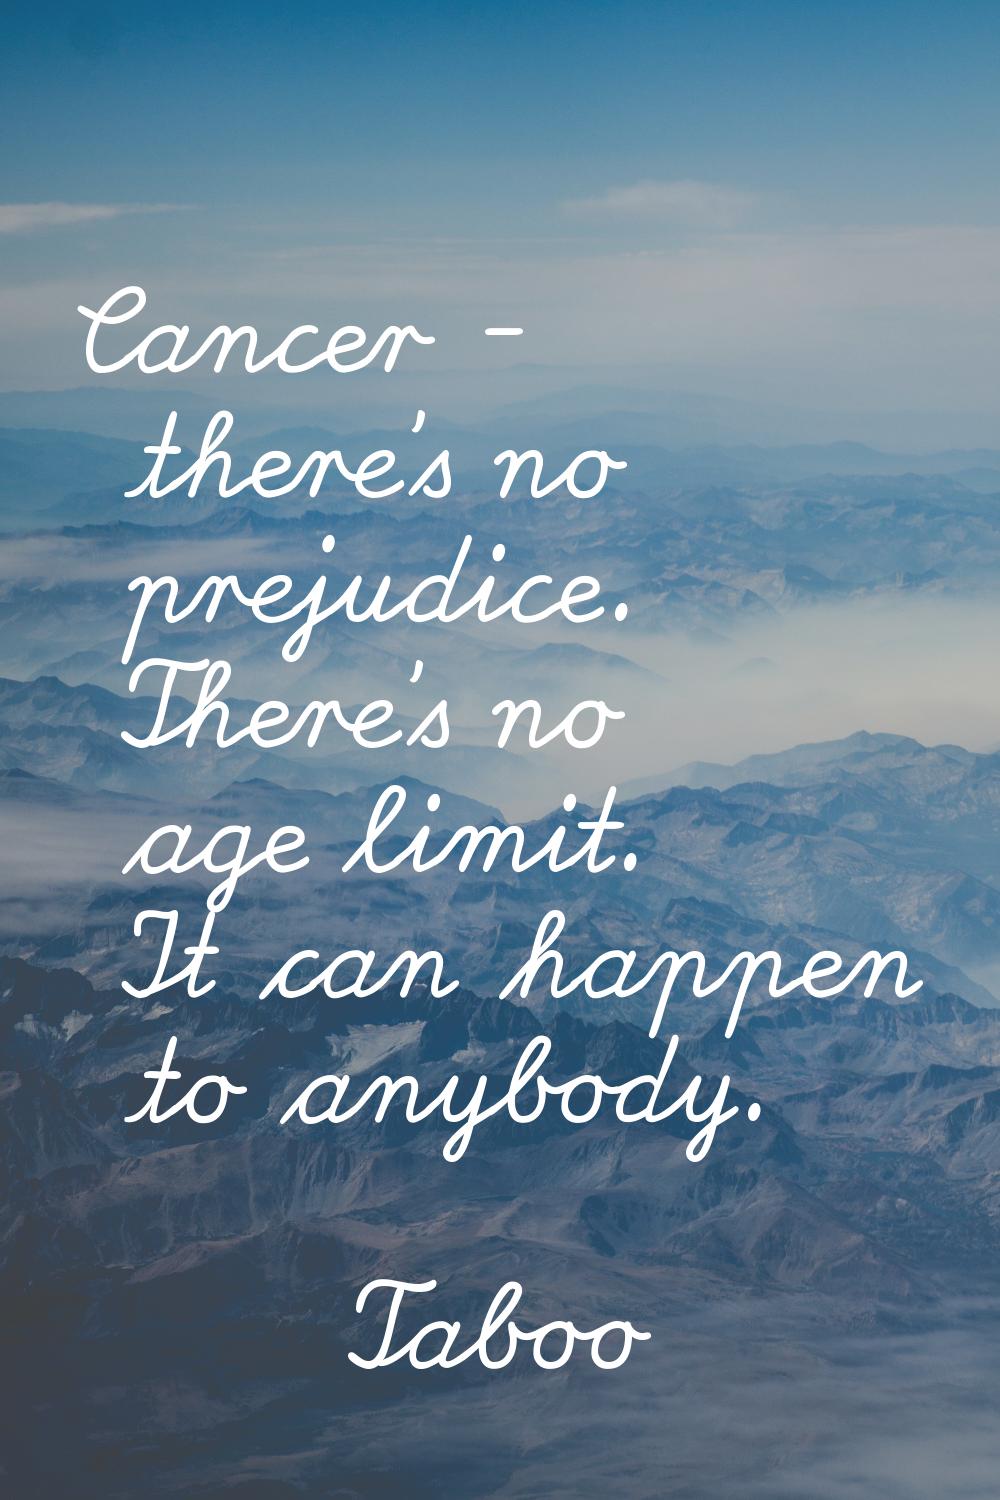 Cancer - there's no prejudice. There's no age limit. It can happen to anybody.